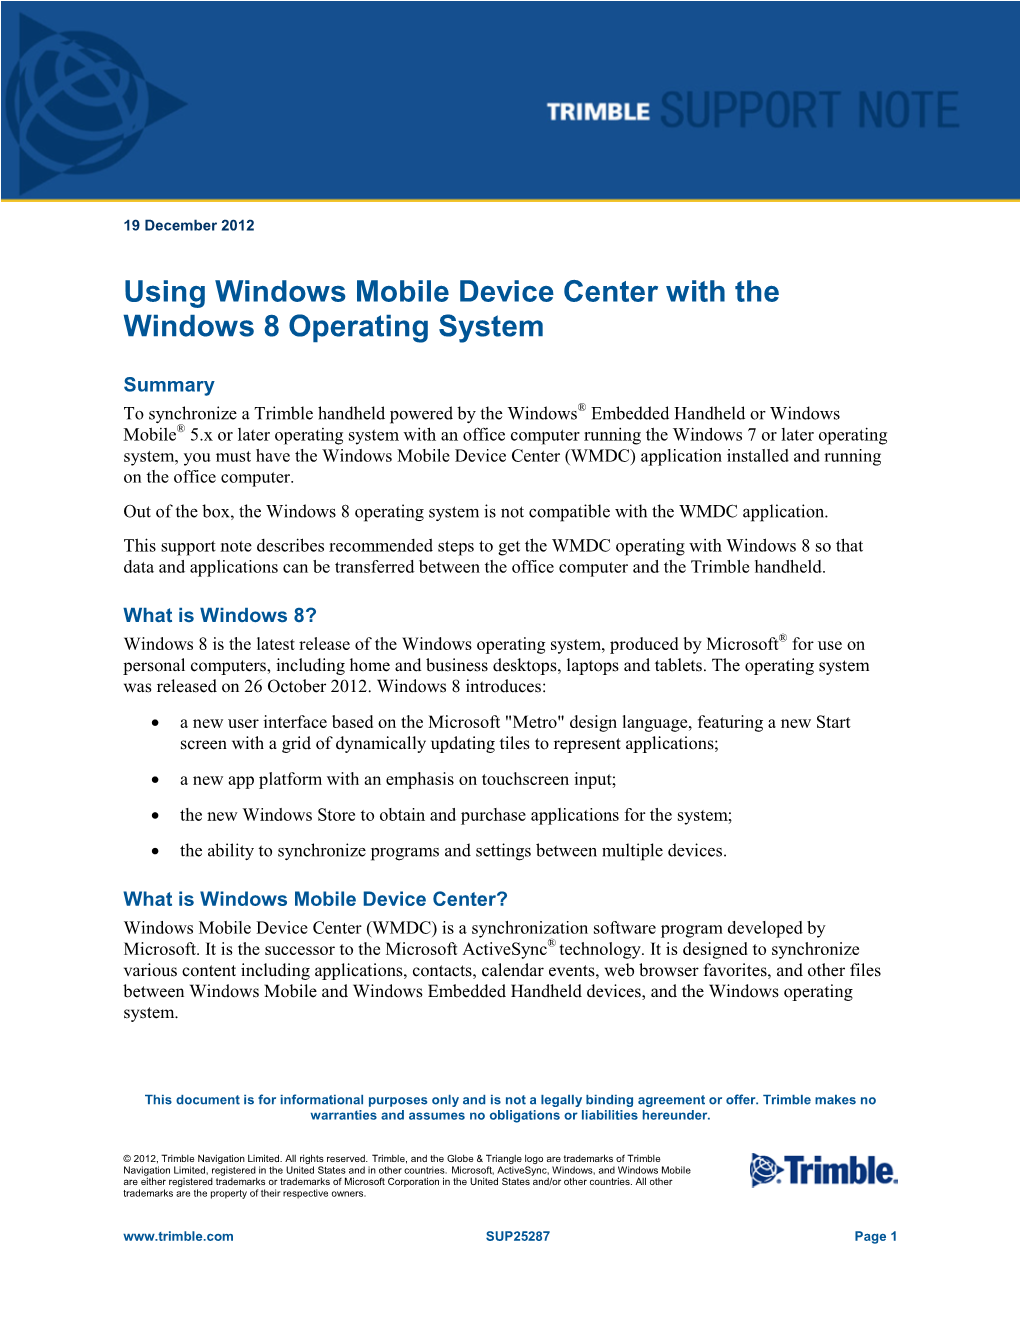 Using Windows Mobile Device Center with the Windows 8 Operating System